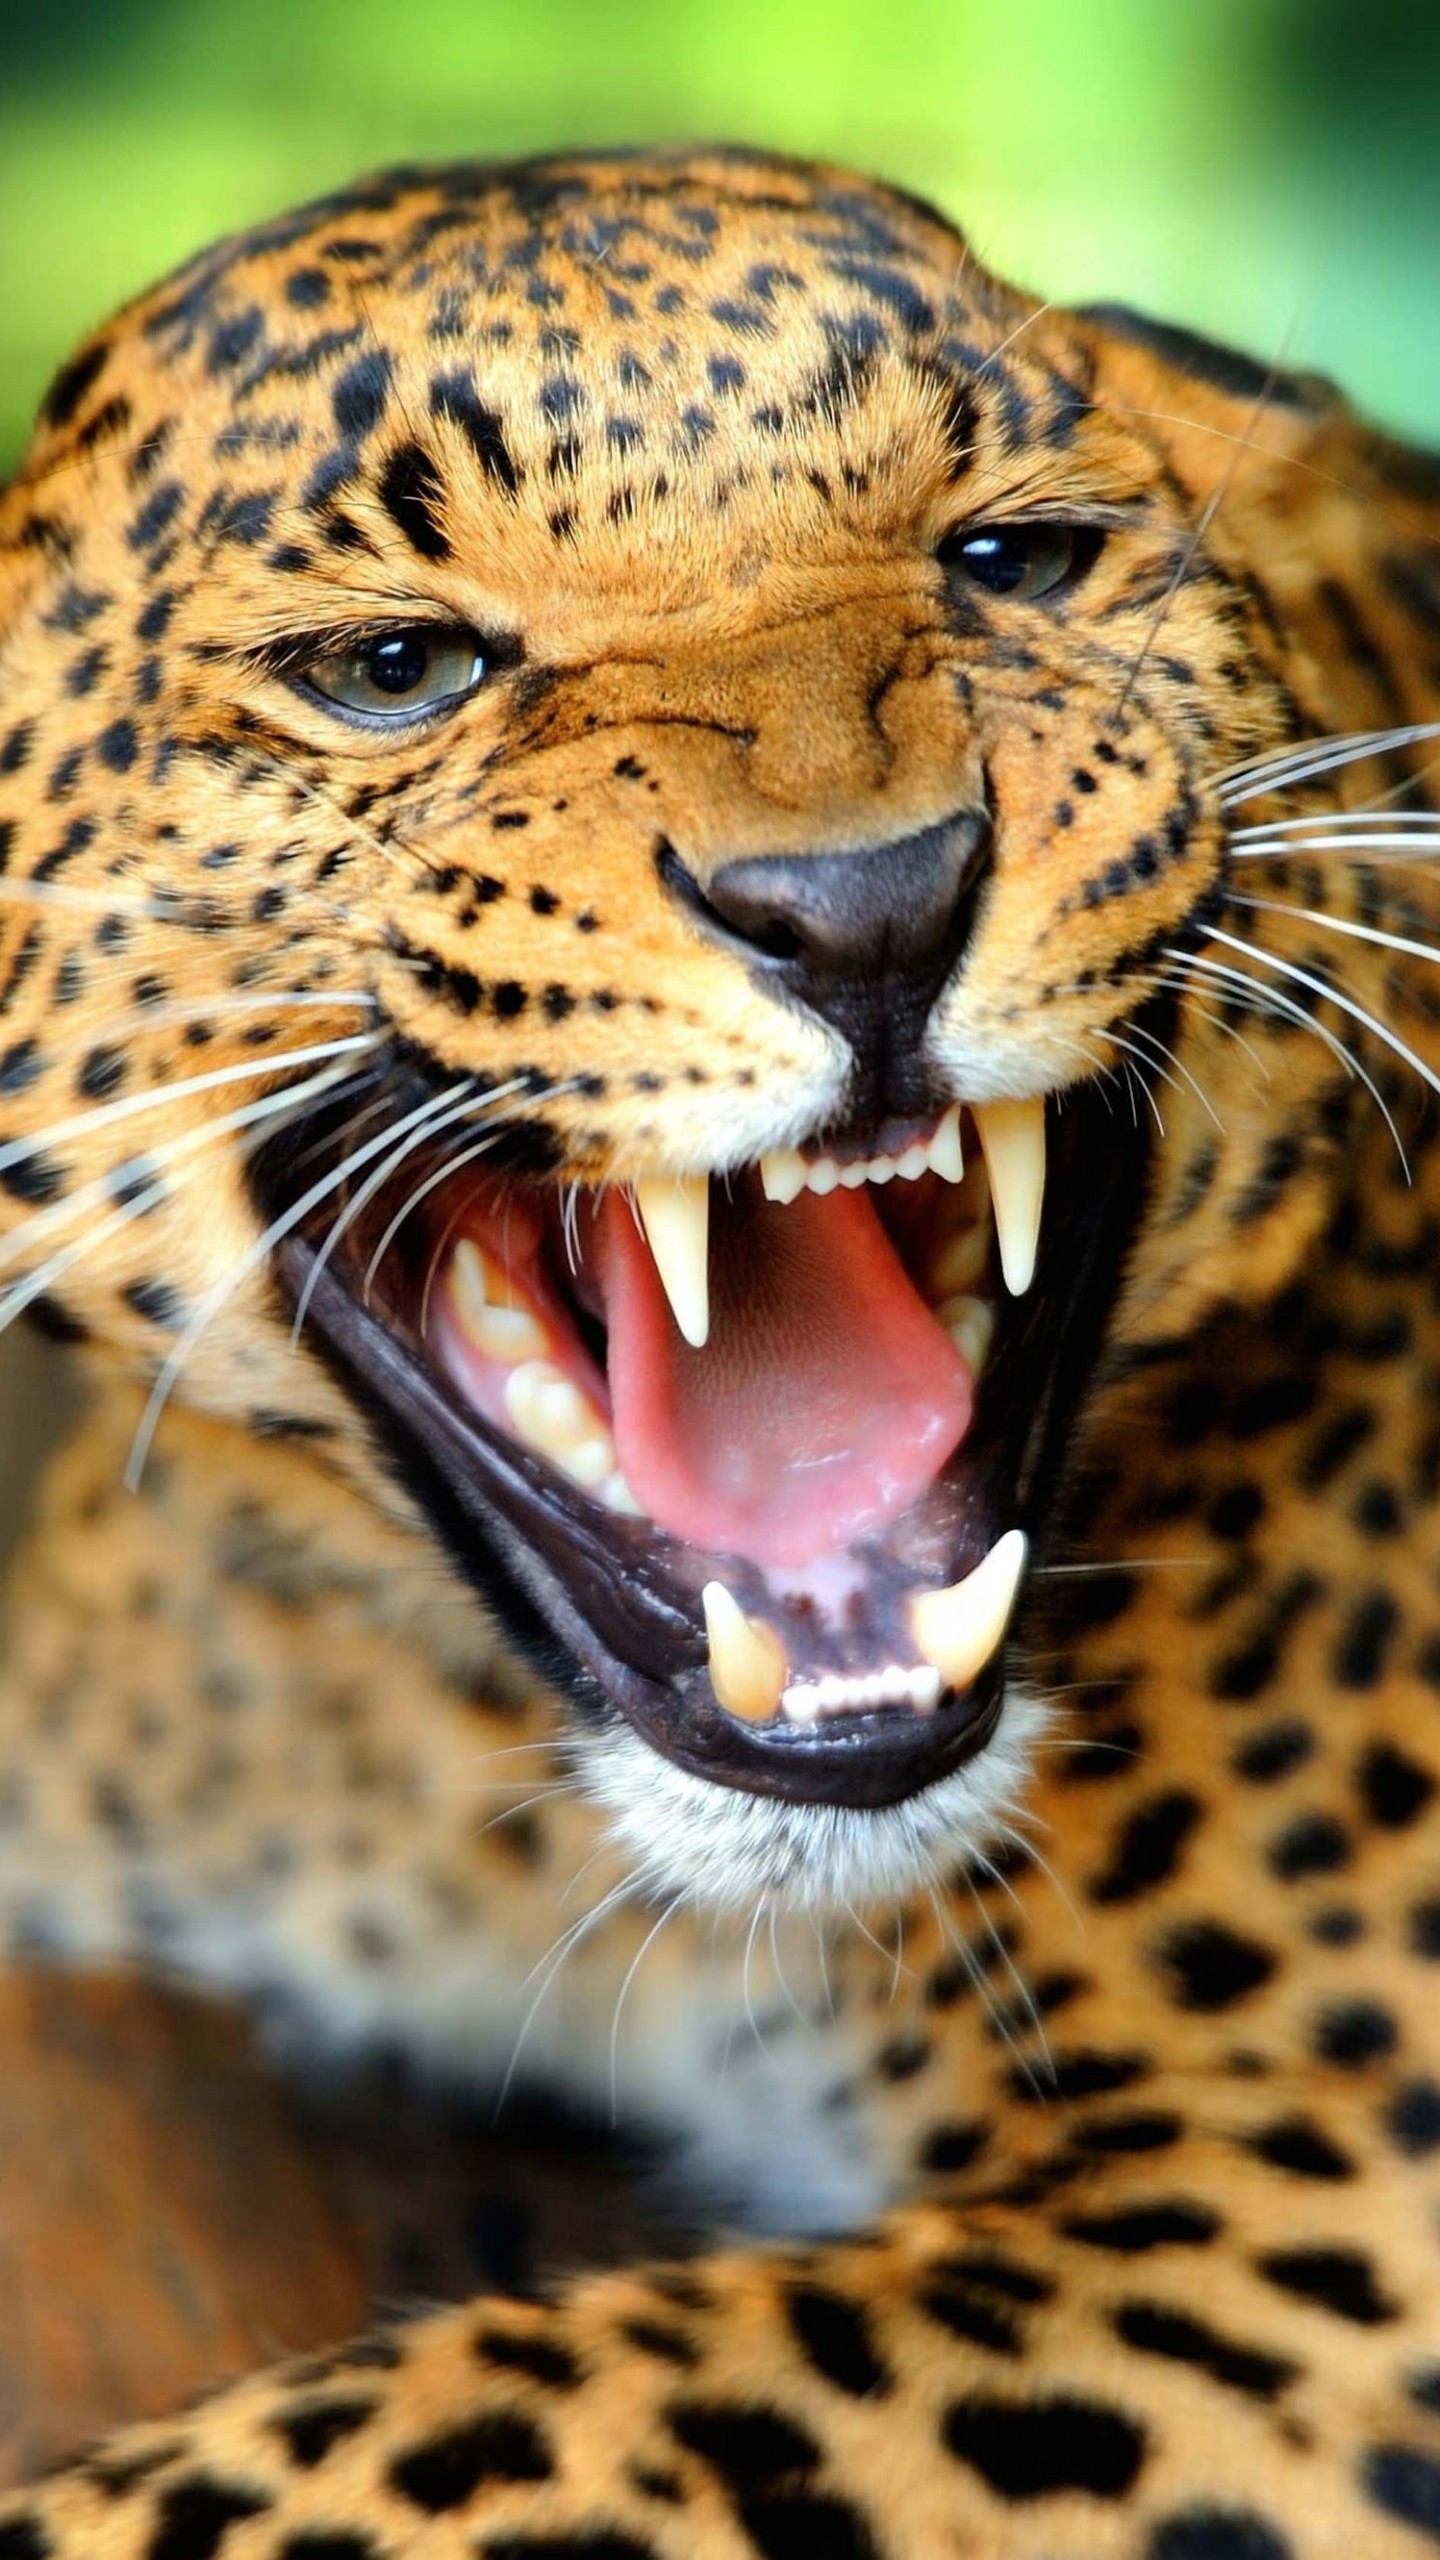 Growling Leopard Wallpaper for SAMSUNG Galaxy Note 4